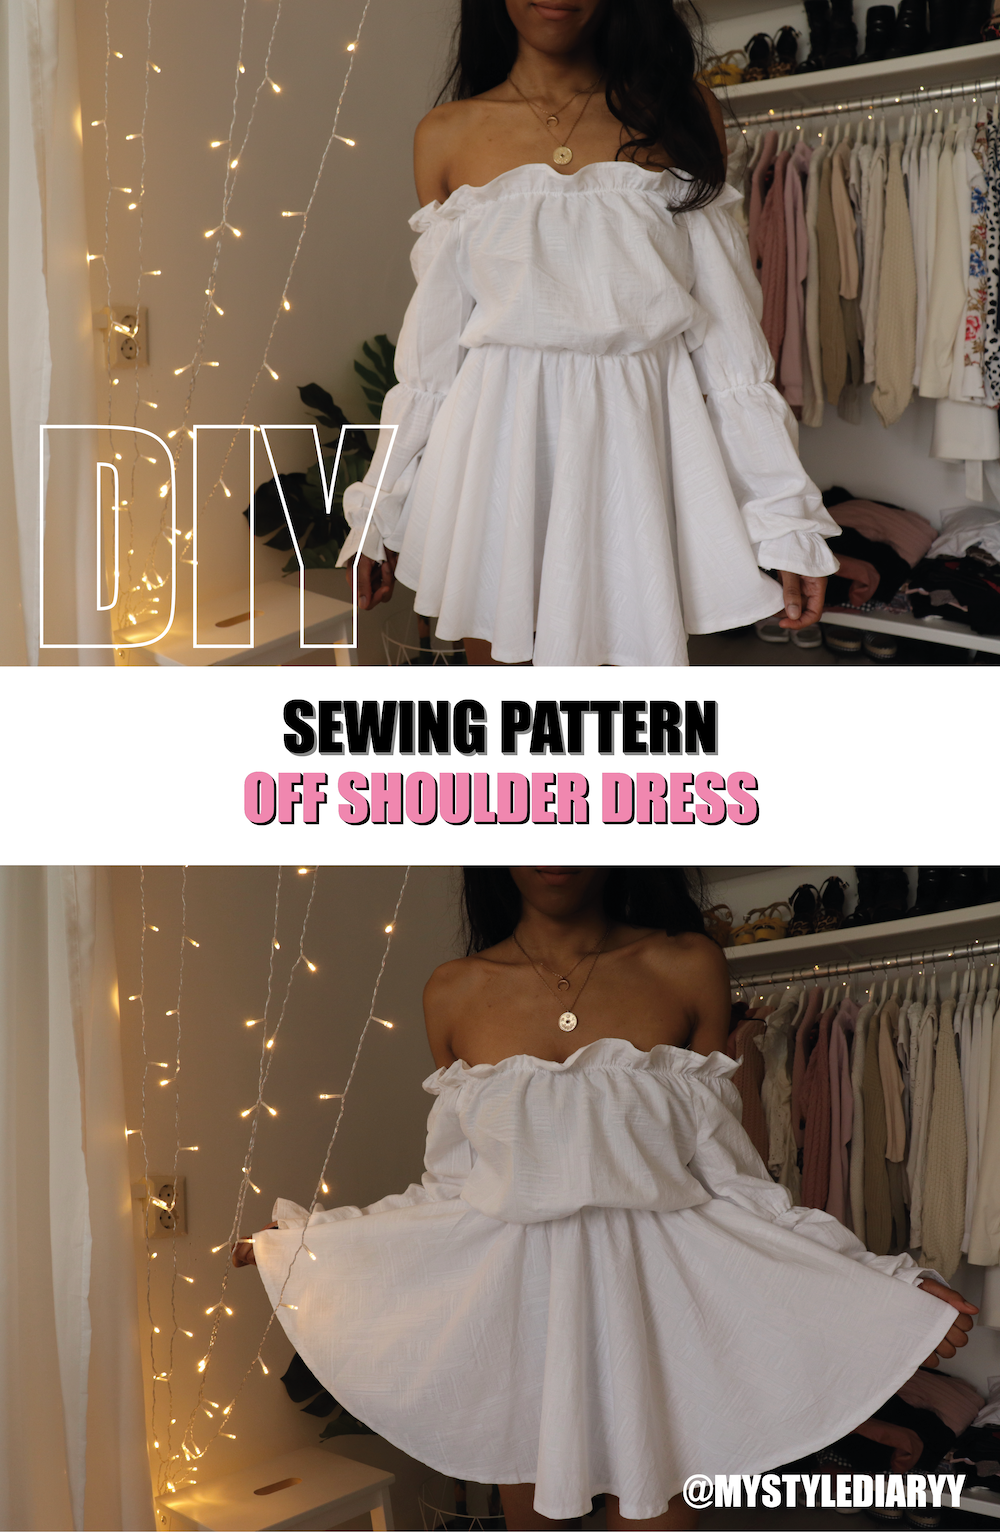 OFF THE SHOULDER DRESS SEWING PATTERN - OFF THE SHOULDER DRESS SEWING PATTERN -   17 diy Clothes for winter ideas